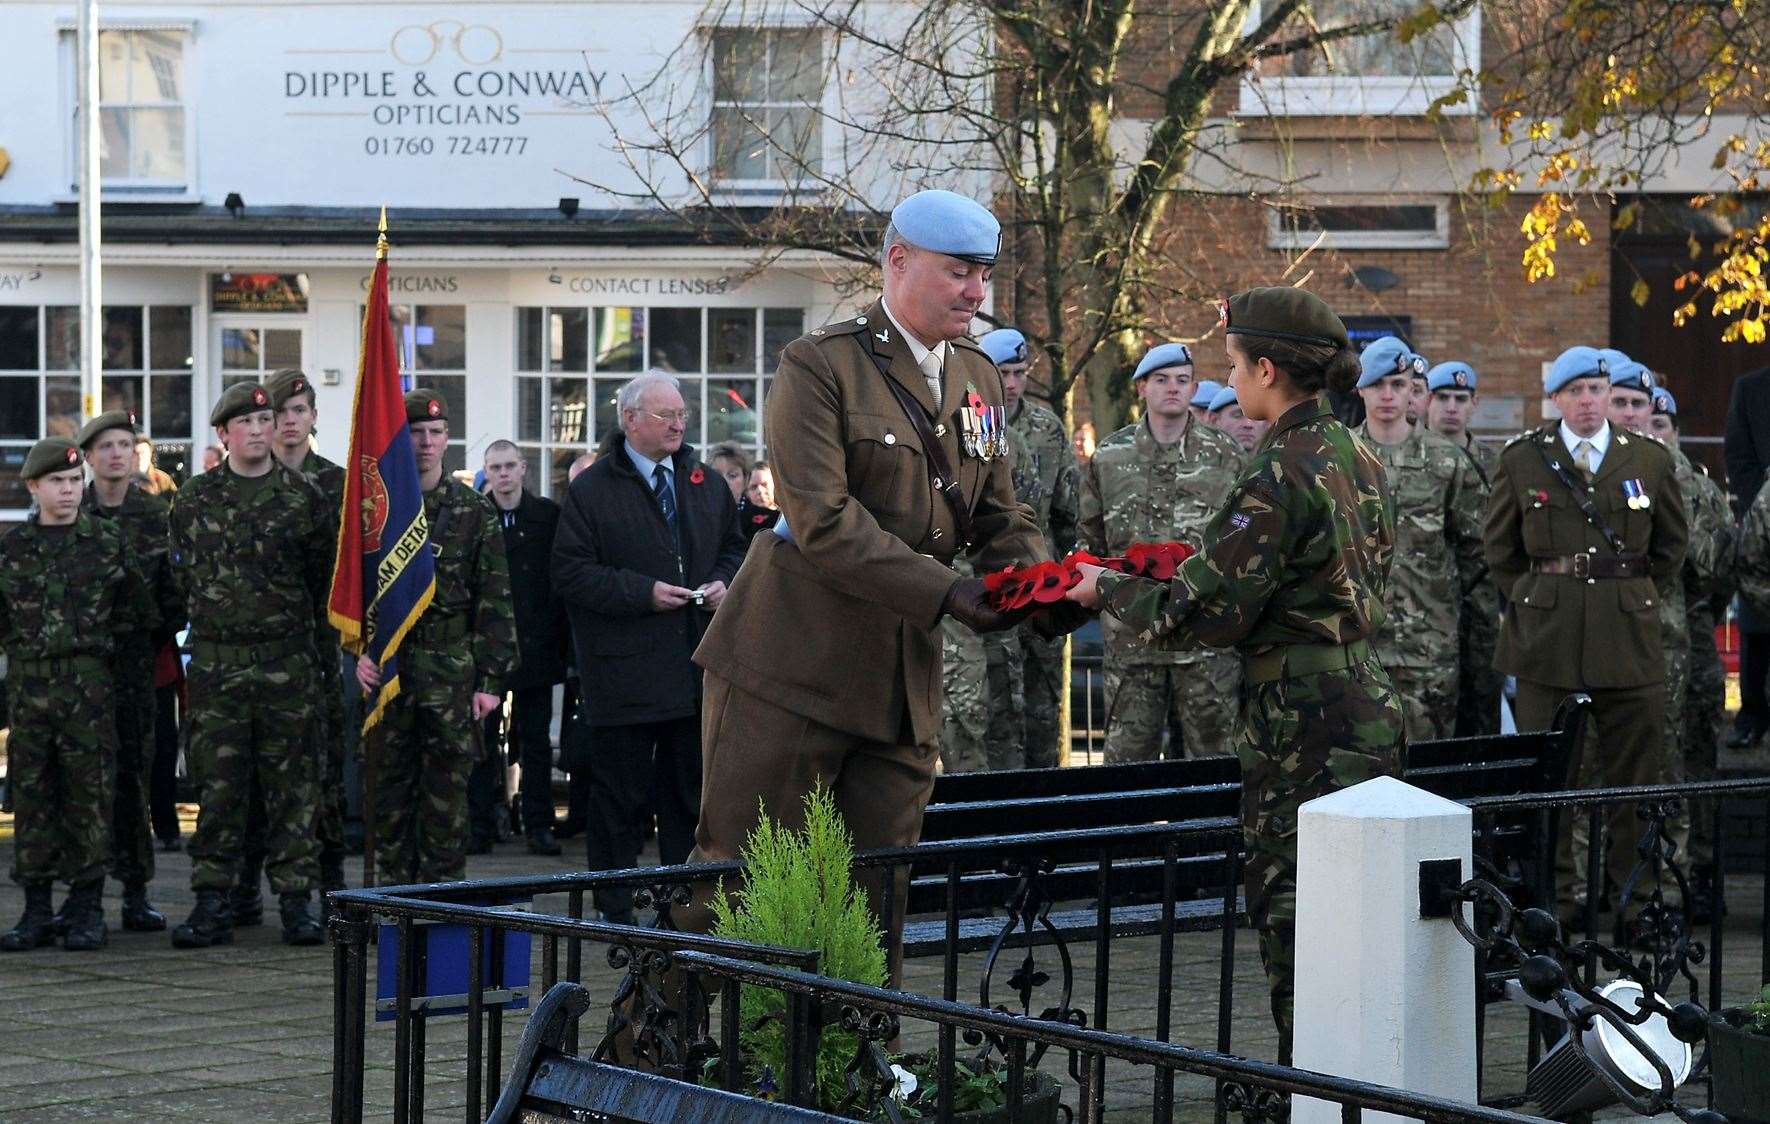 Remembrance Day parade and service at Swaffham's war memorial last year.